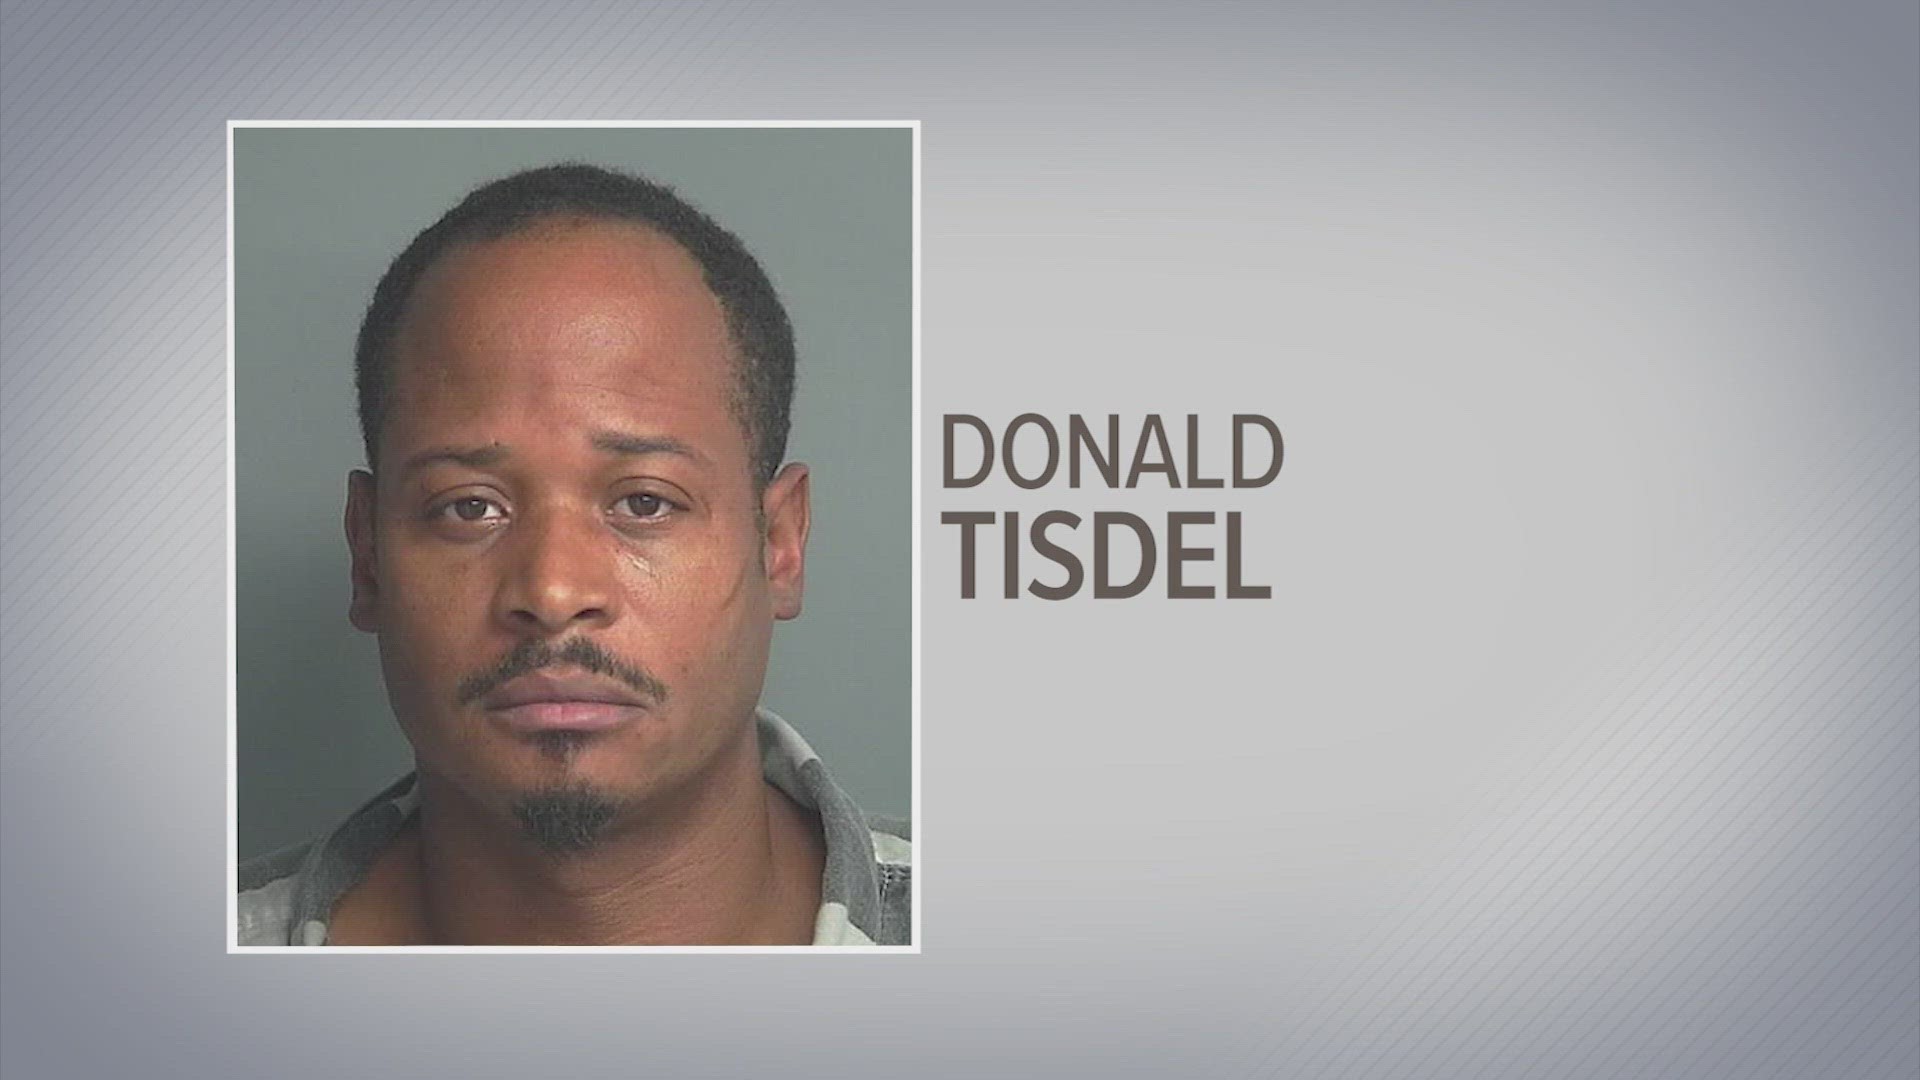 The DA's office identified the man as 45-year-old Donald Tisdale, who was working as a bus monitor at the time of the video.